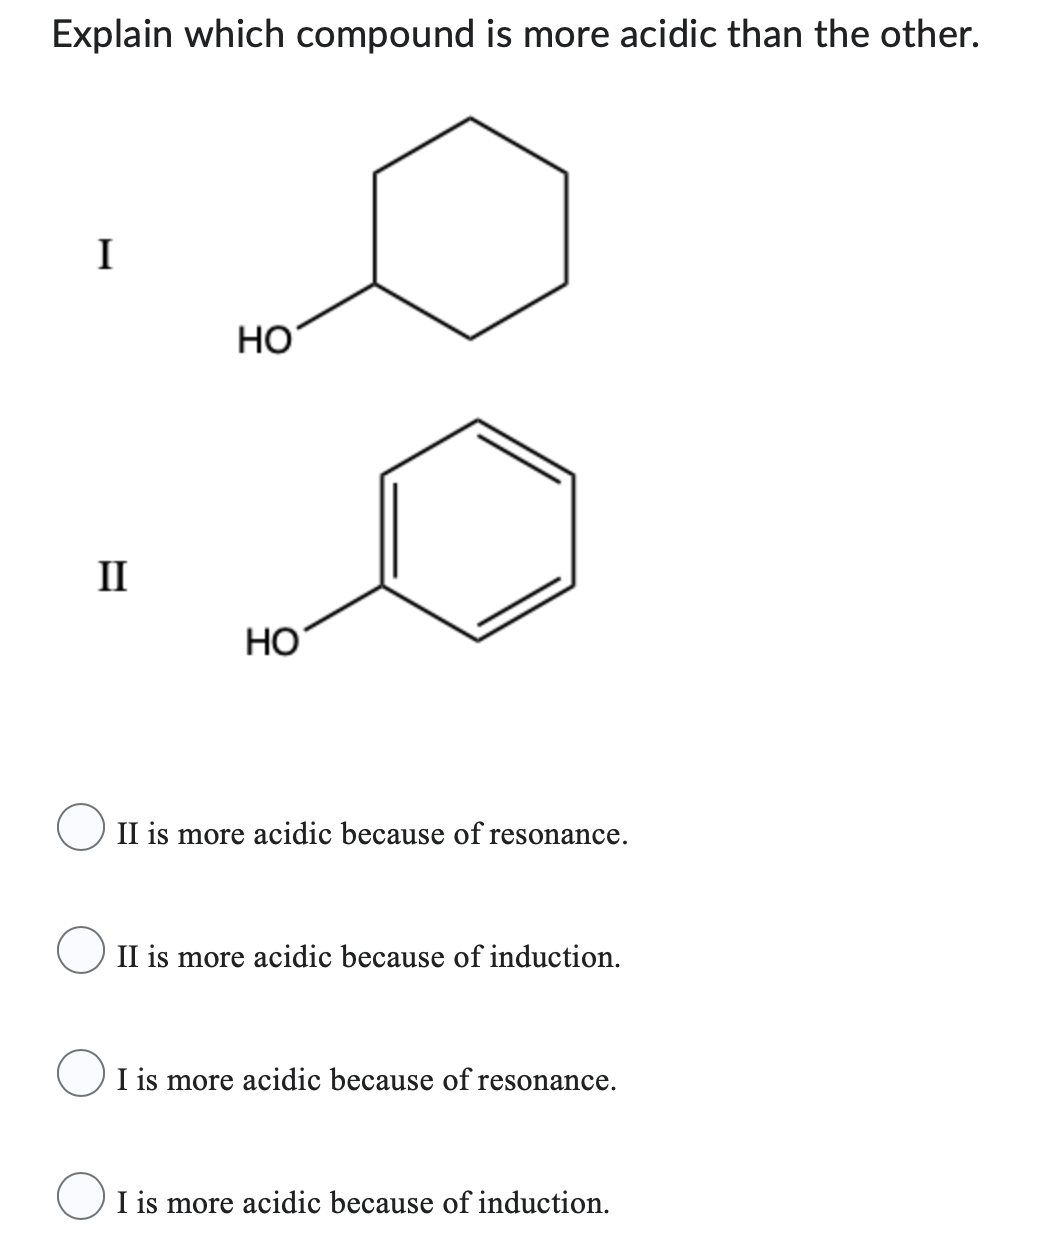 Explain which compound is more acidic than the other.
I
II
HO
HO
II is more acidic because of resonance.
II is more acidic because of induction.
I is more acidic because of resonance.
I is more acidic because of induction.